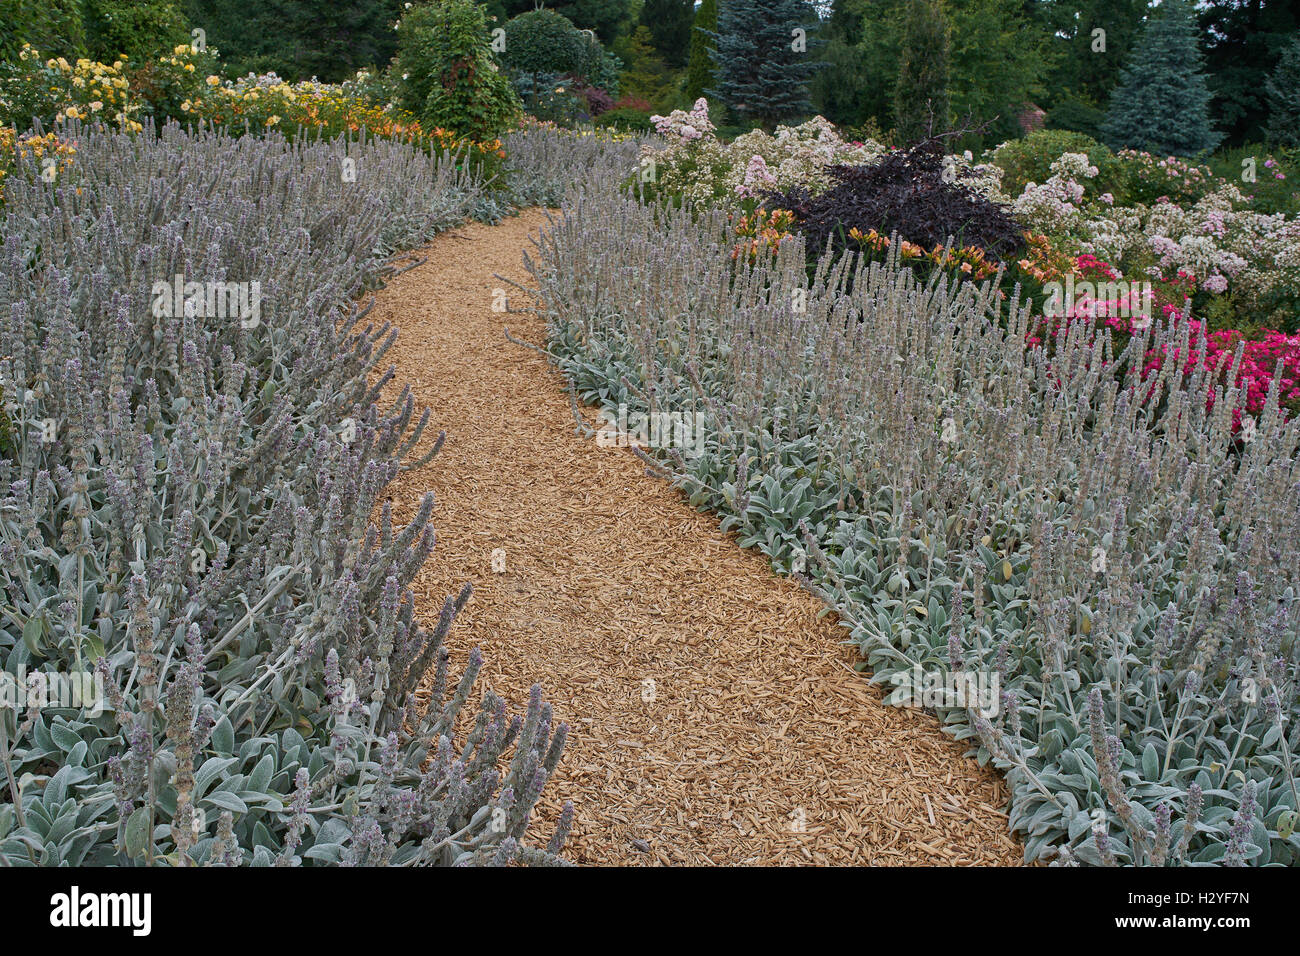 Garden path among blooming lamb's ears flowers Stachys byzantina Stock Photo